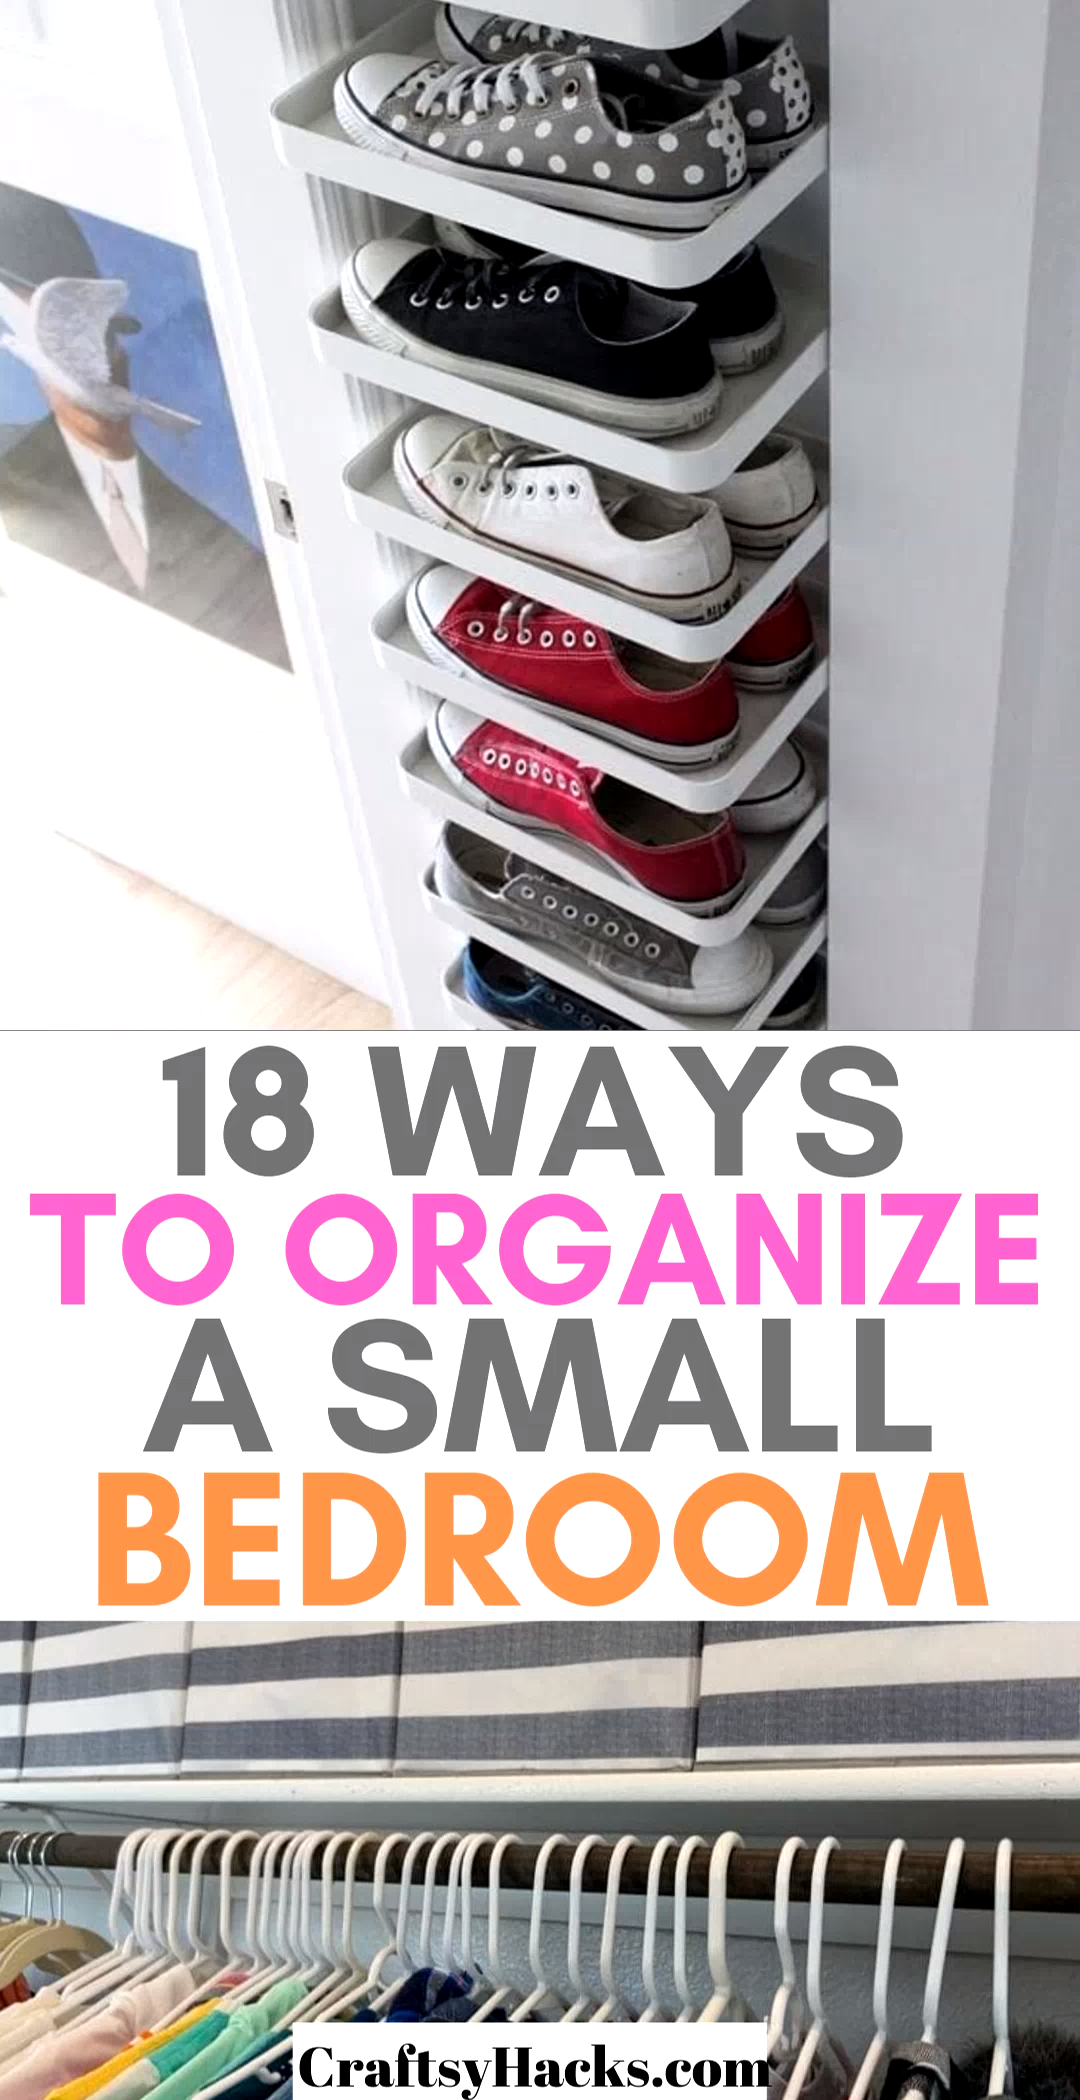 18 Ways to Organize a Small Bedroom